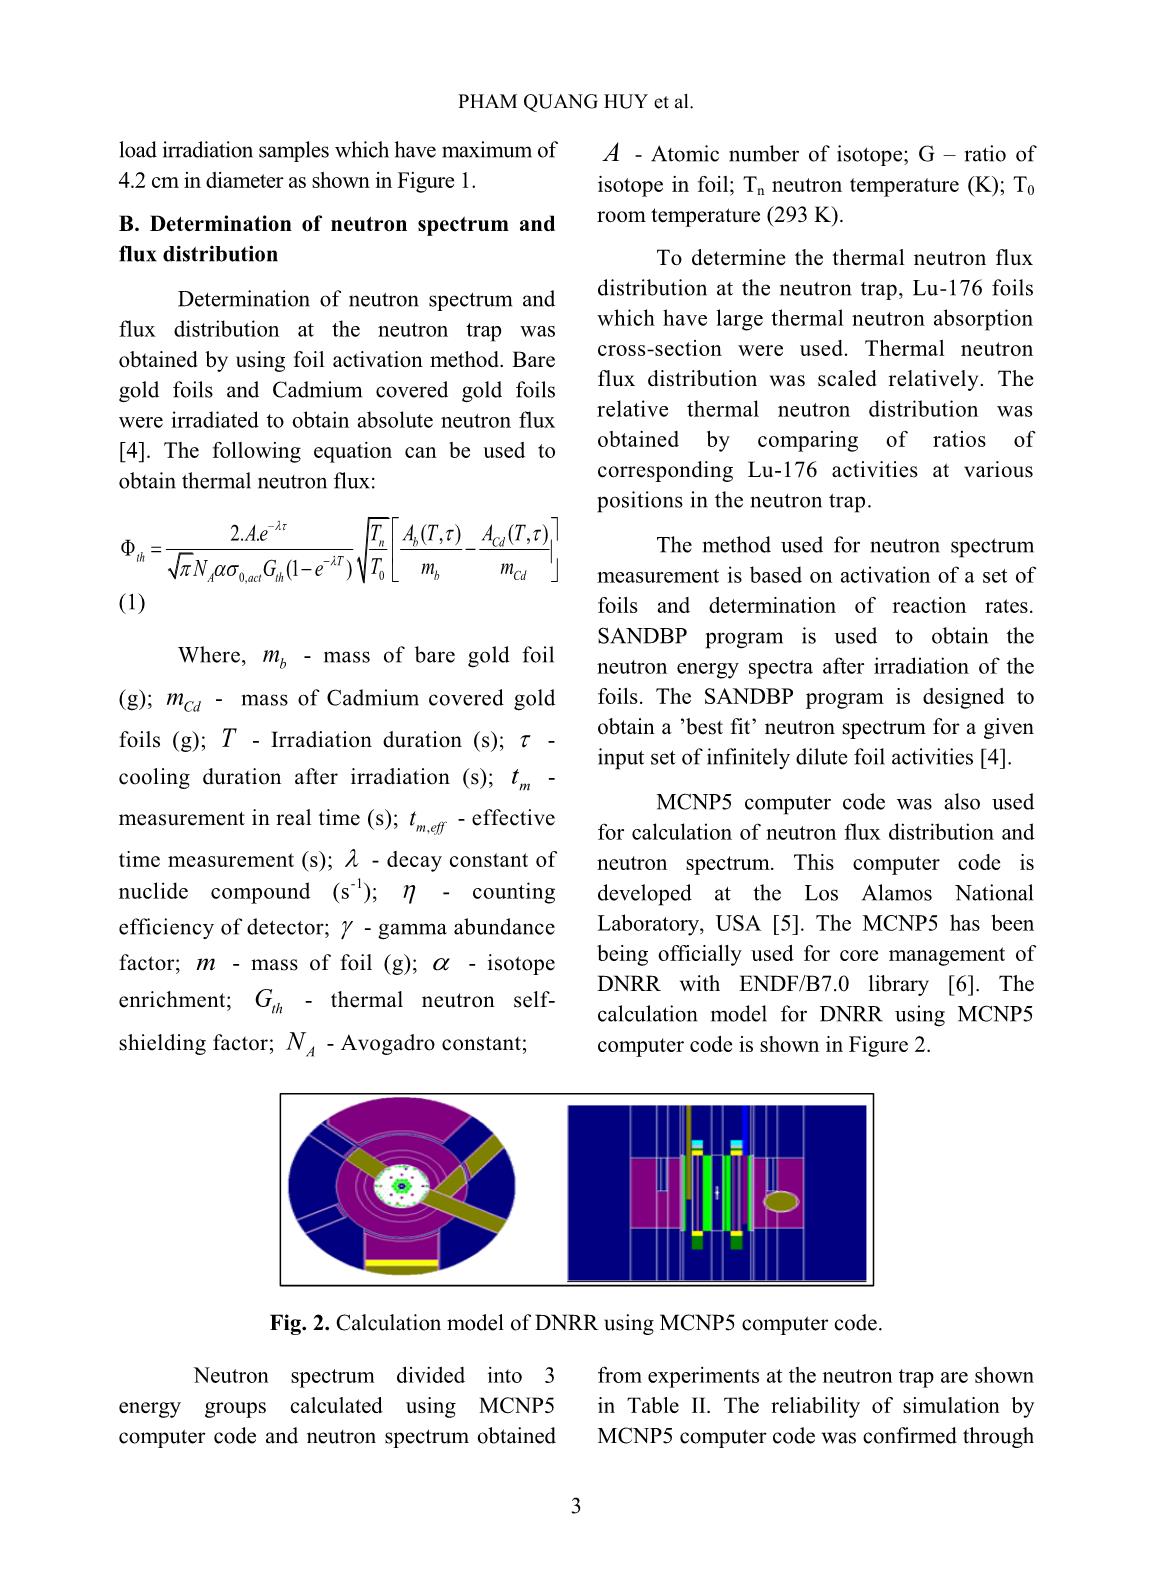 Design of an irradiation rig using screen method for silicon transmutation doping at the Dalat research reactor trang 3